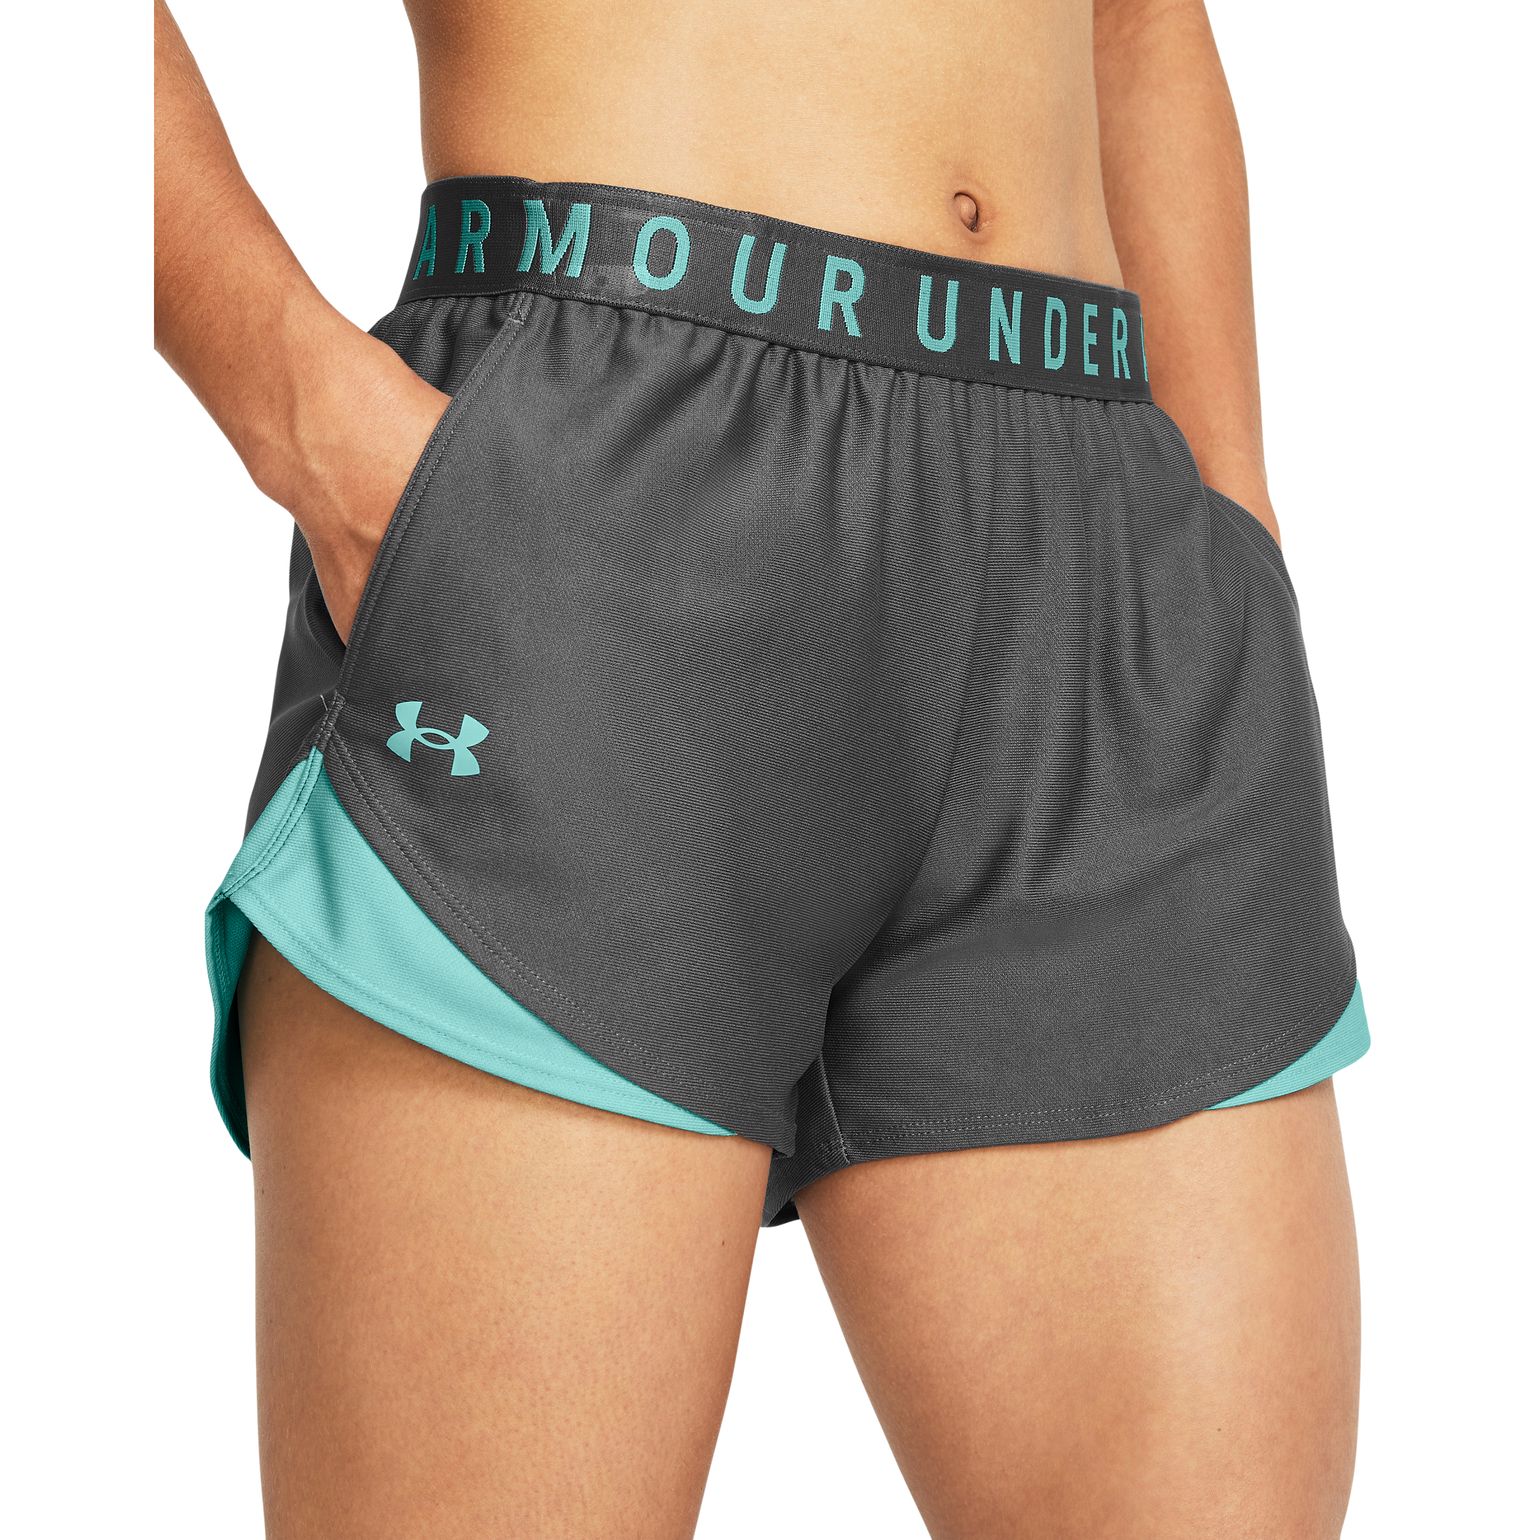 Under Armour Women's Play Up Shorts 3.0 Castlerock/Radial Turquoise